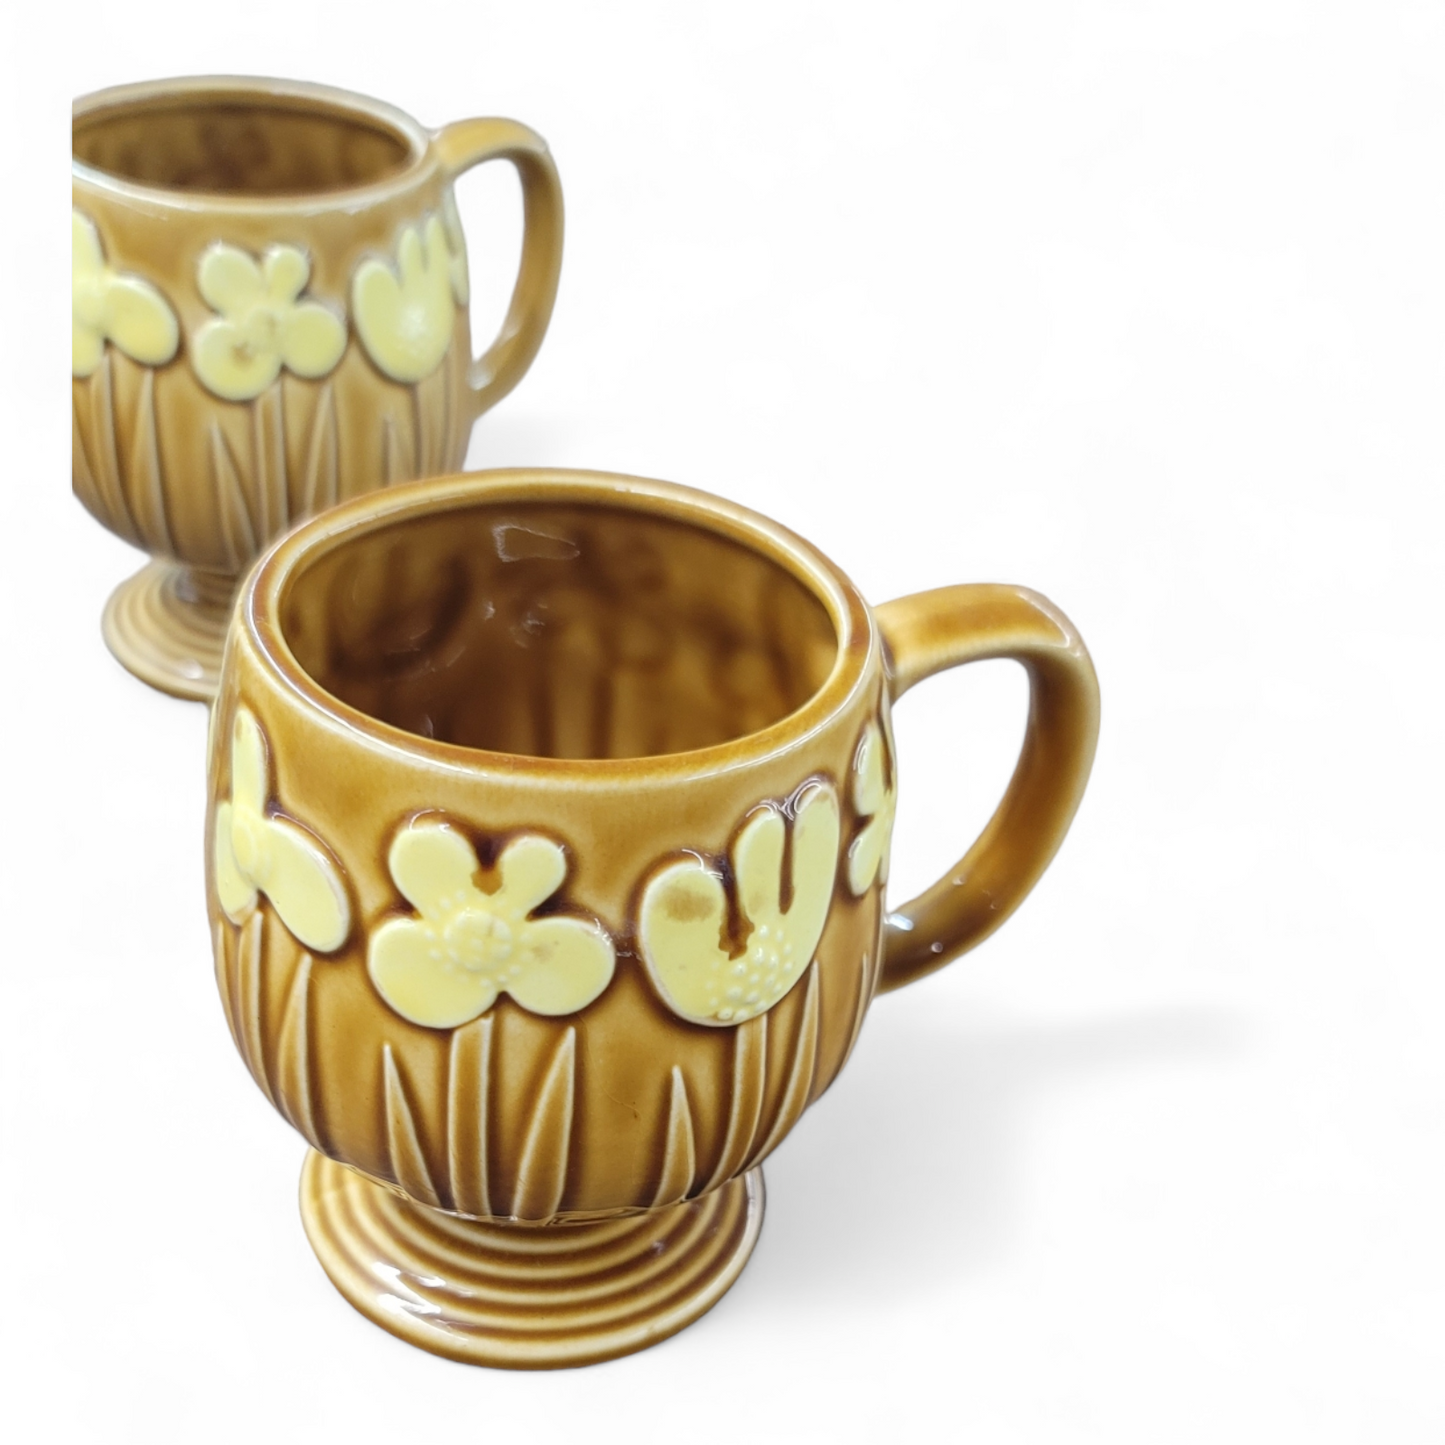 Vintage hand painted in Japan retro yellow and brown Daisy and tulip mugs coffee cups and cream set